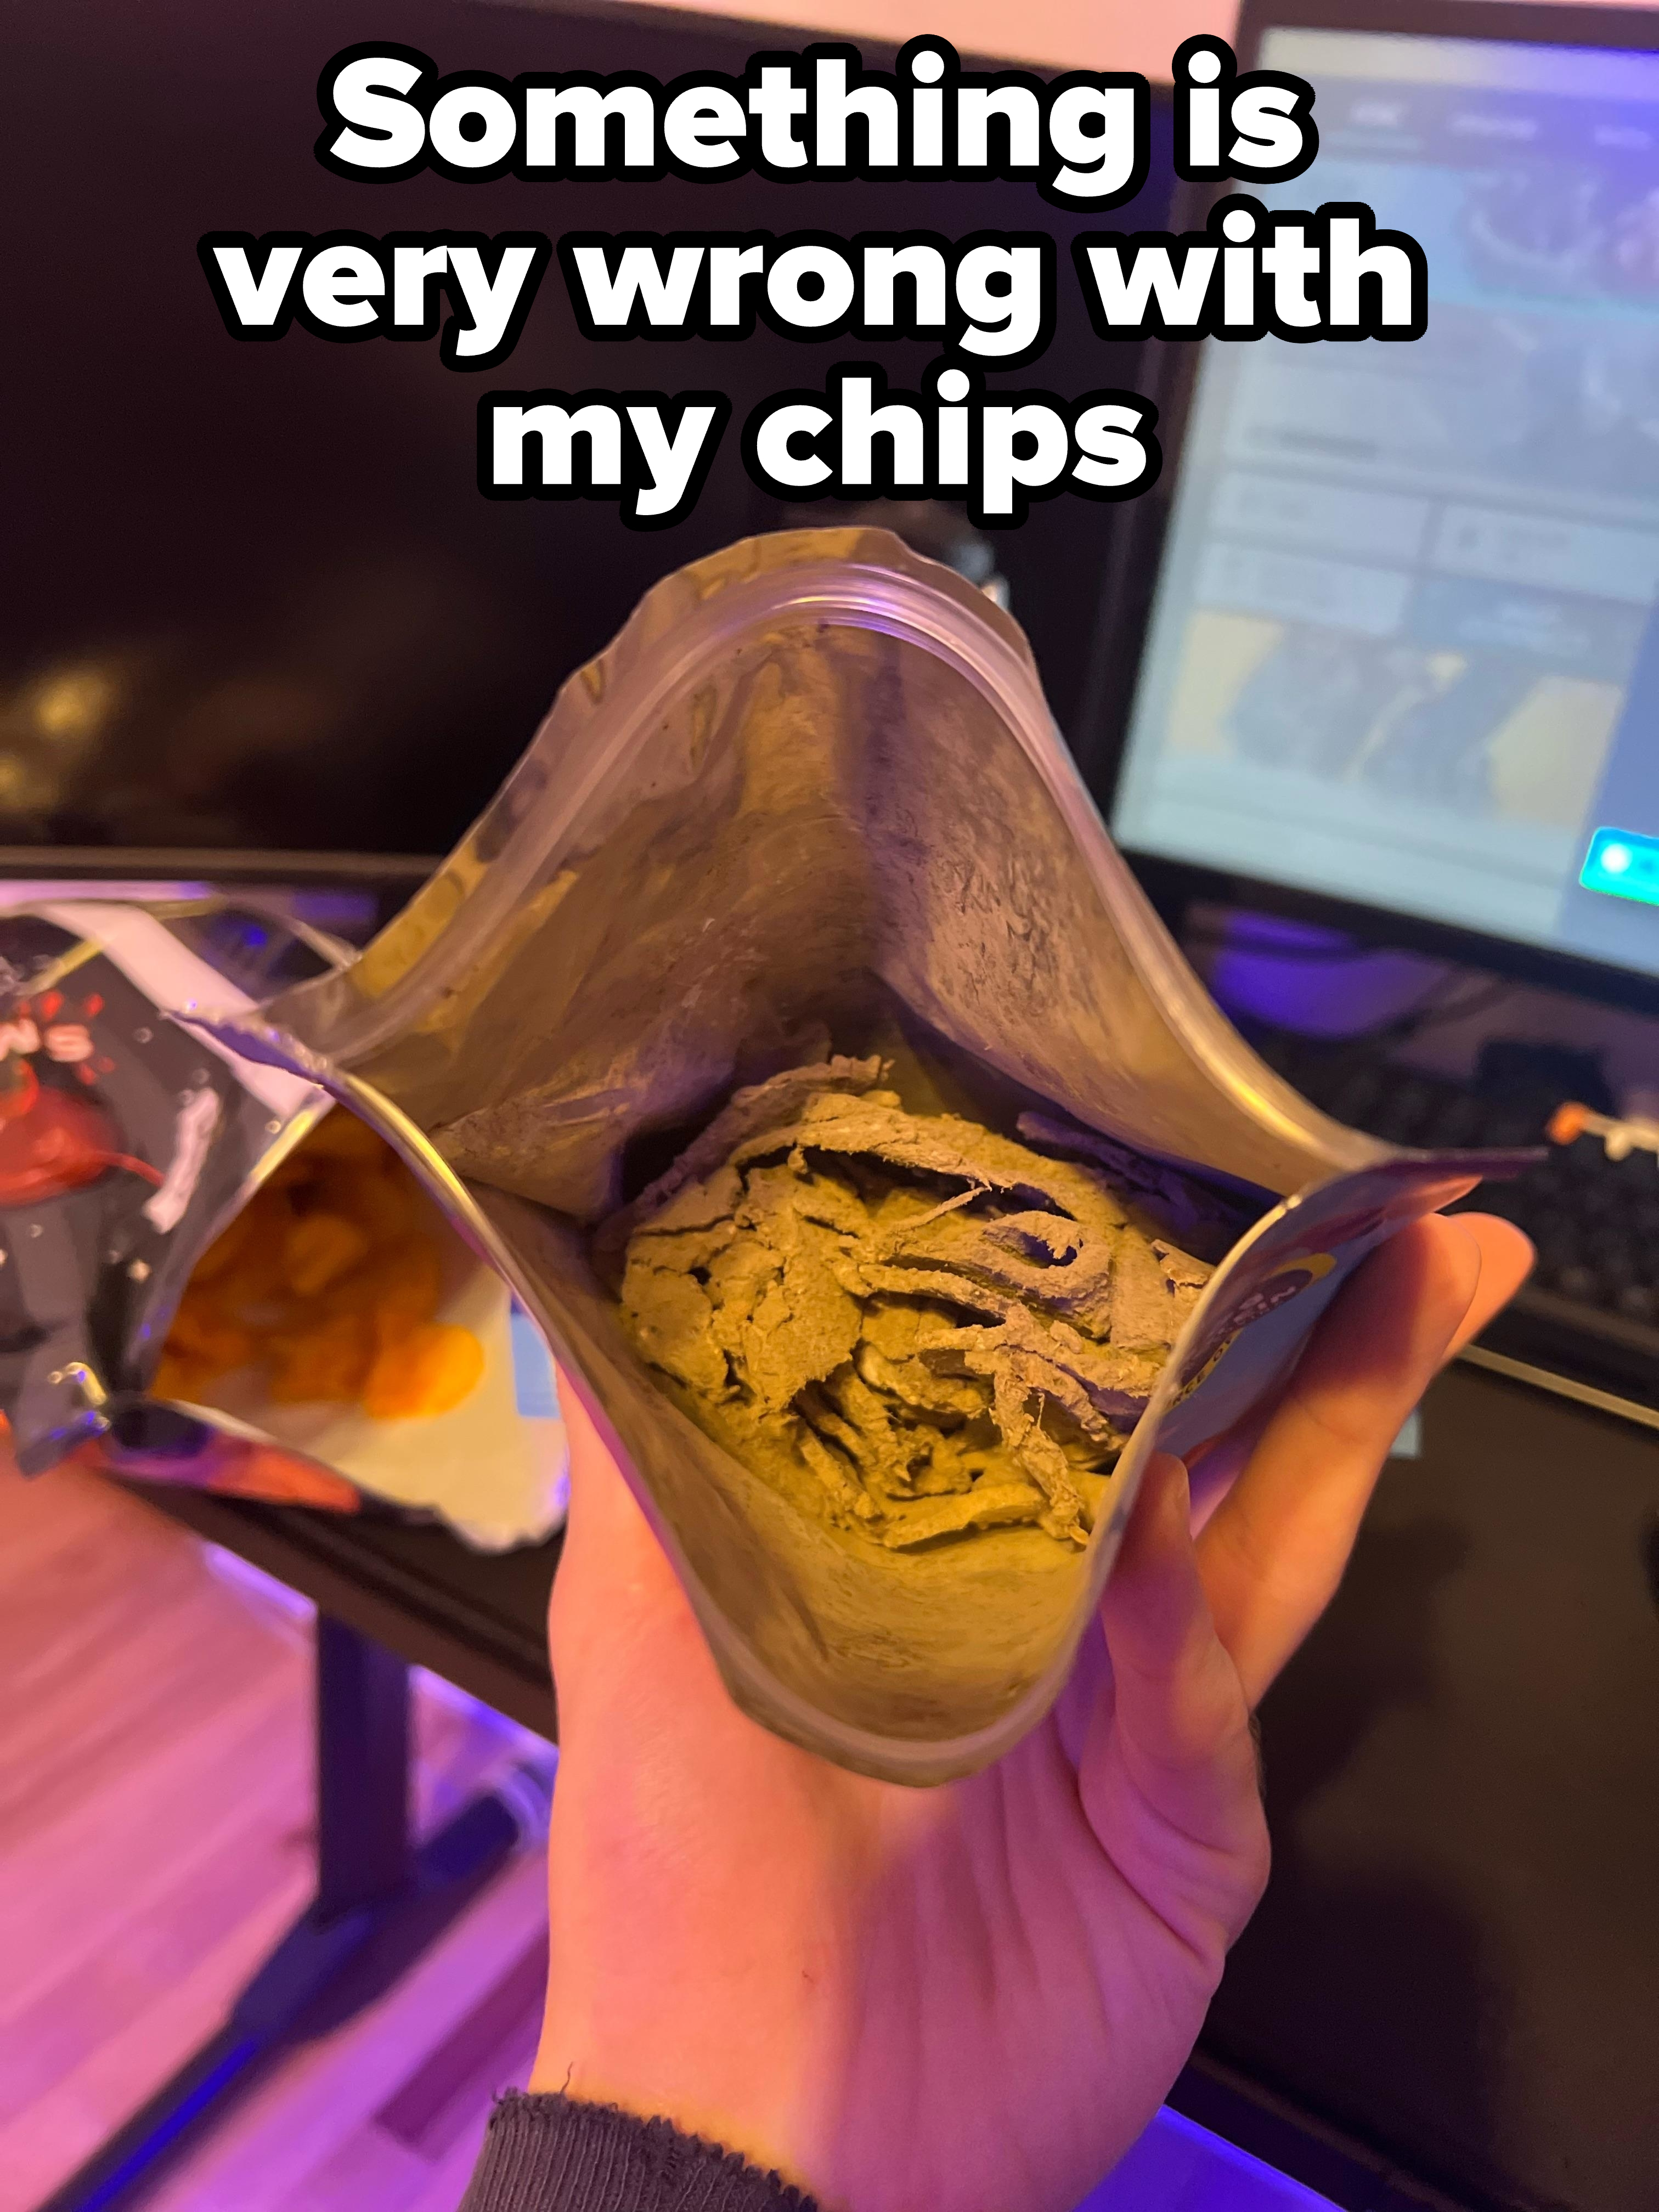 &quot;Something is very wrong with my chips&quot;